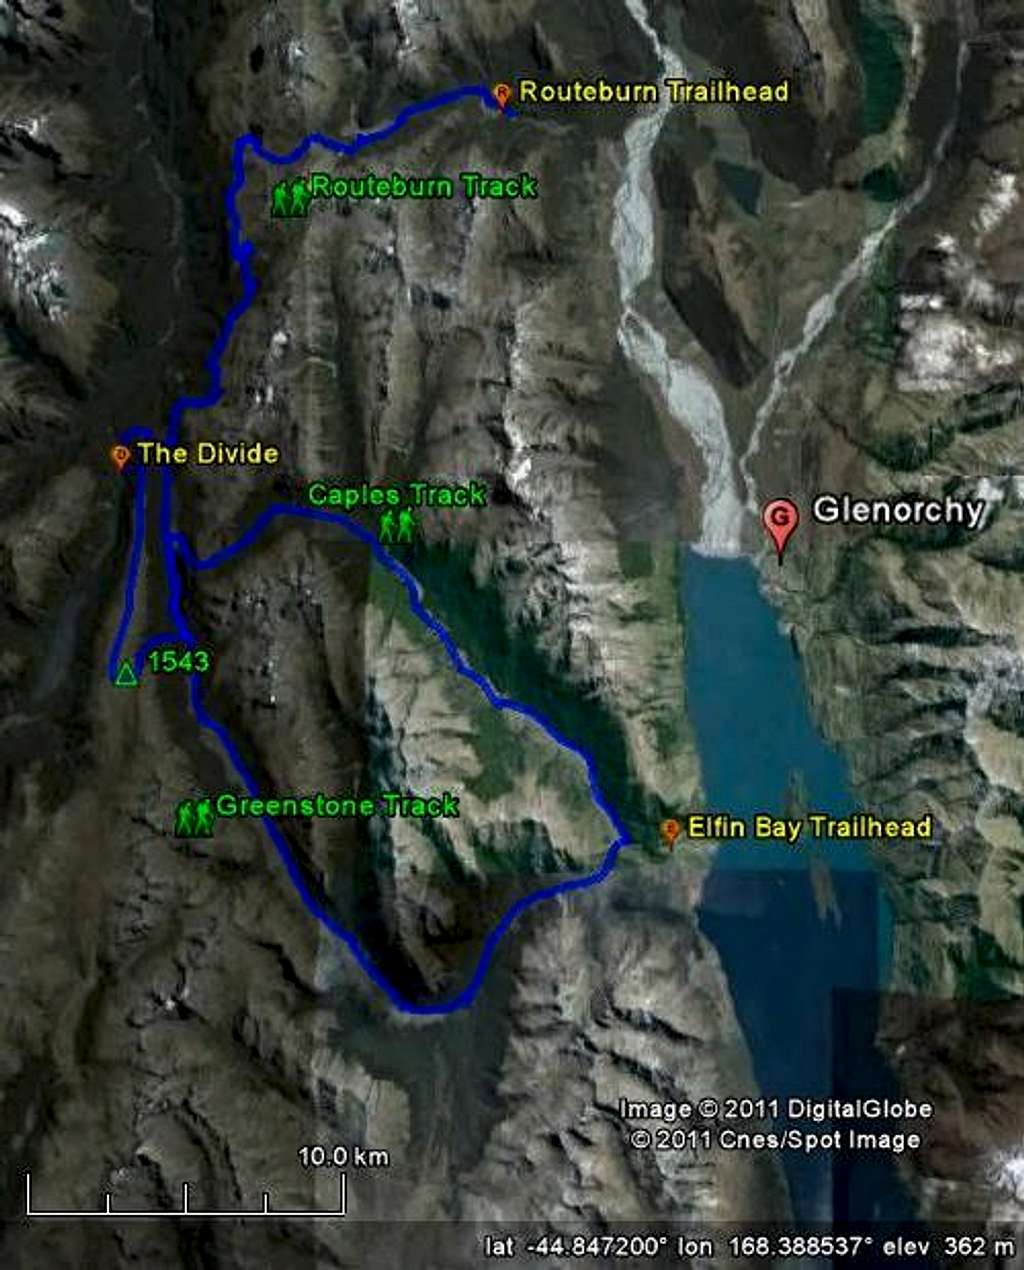 Map of the Routeburn, Caples and Greenstone Tracks